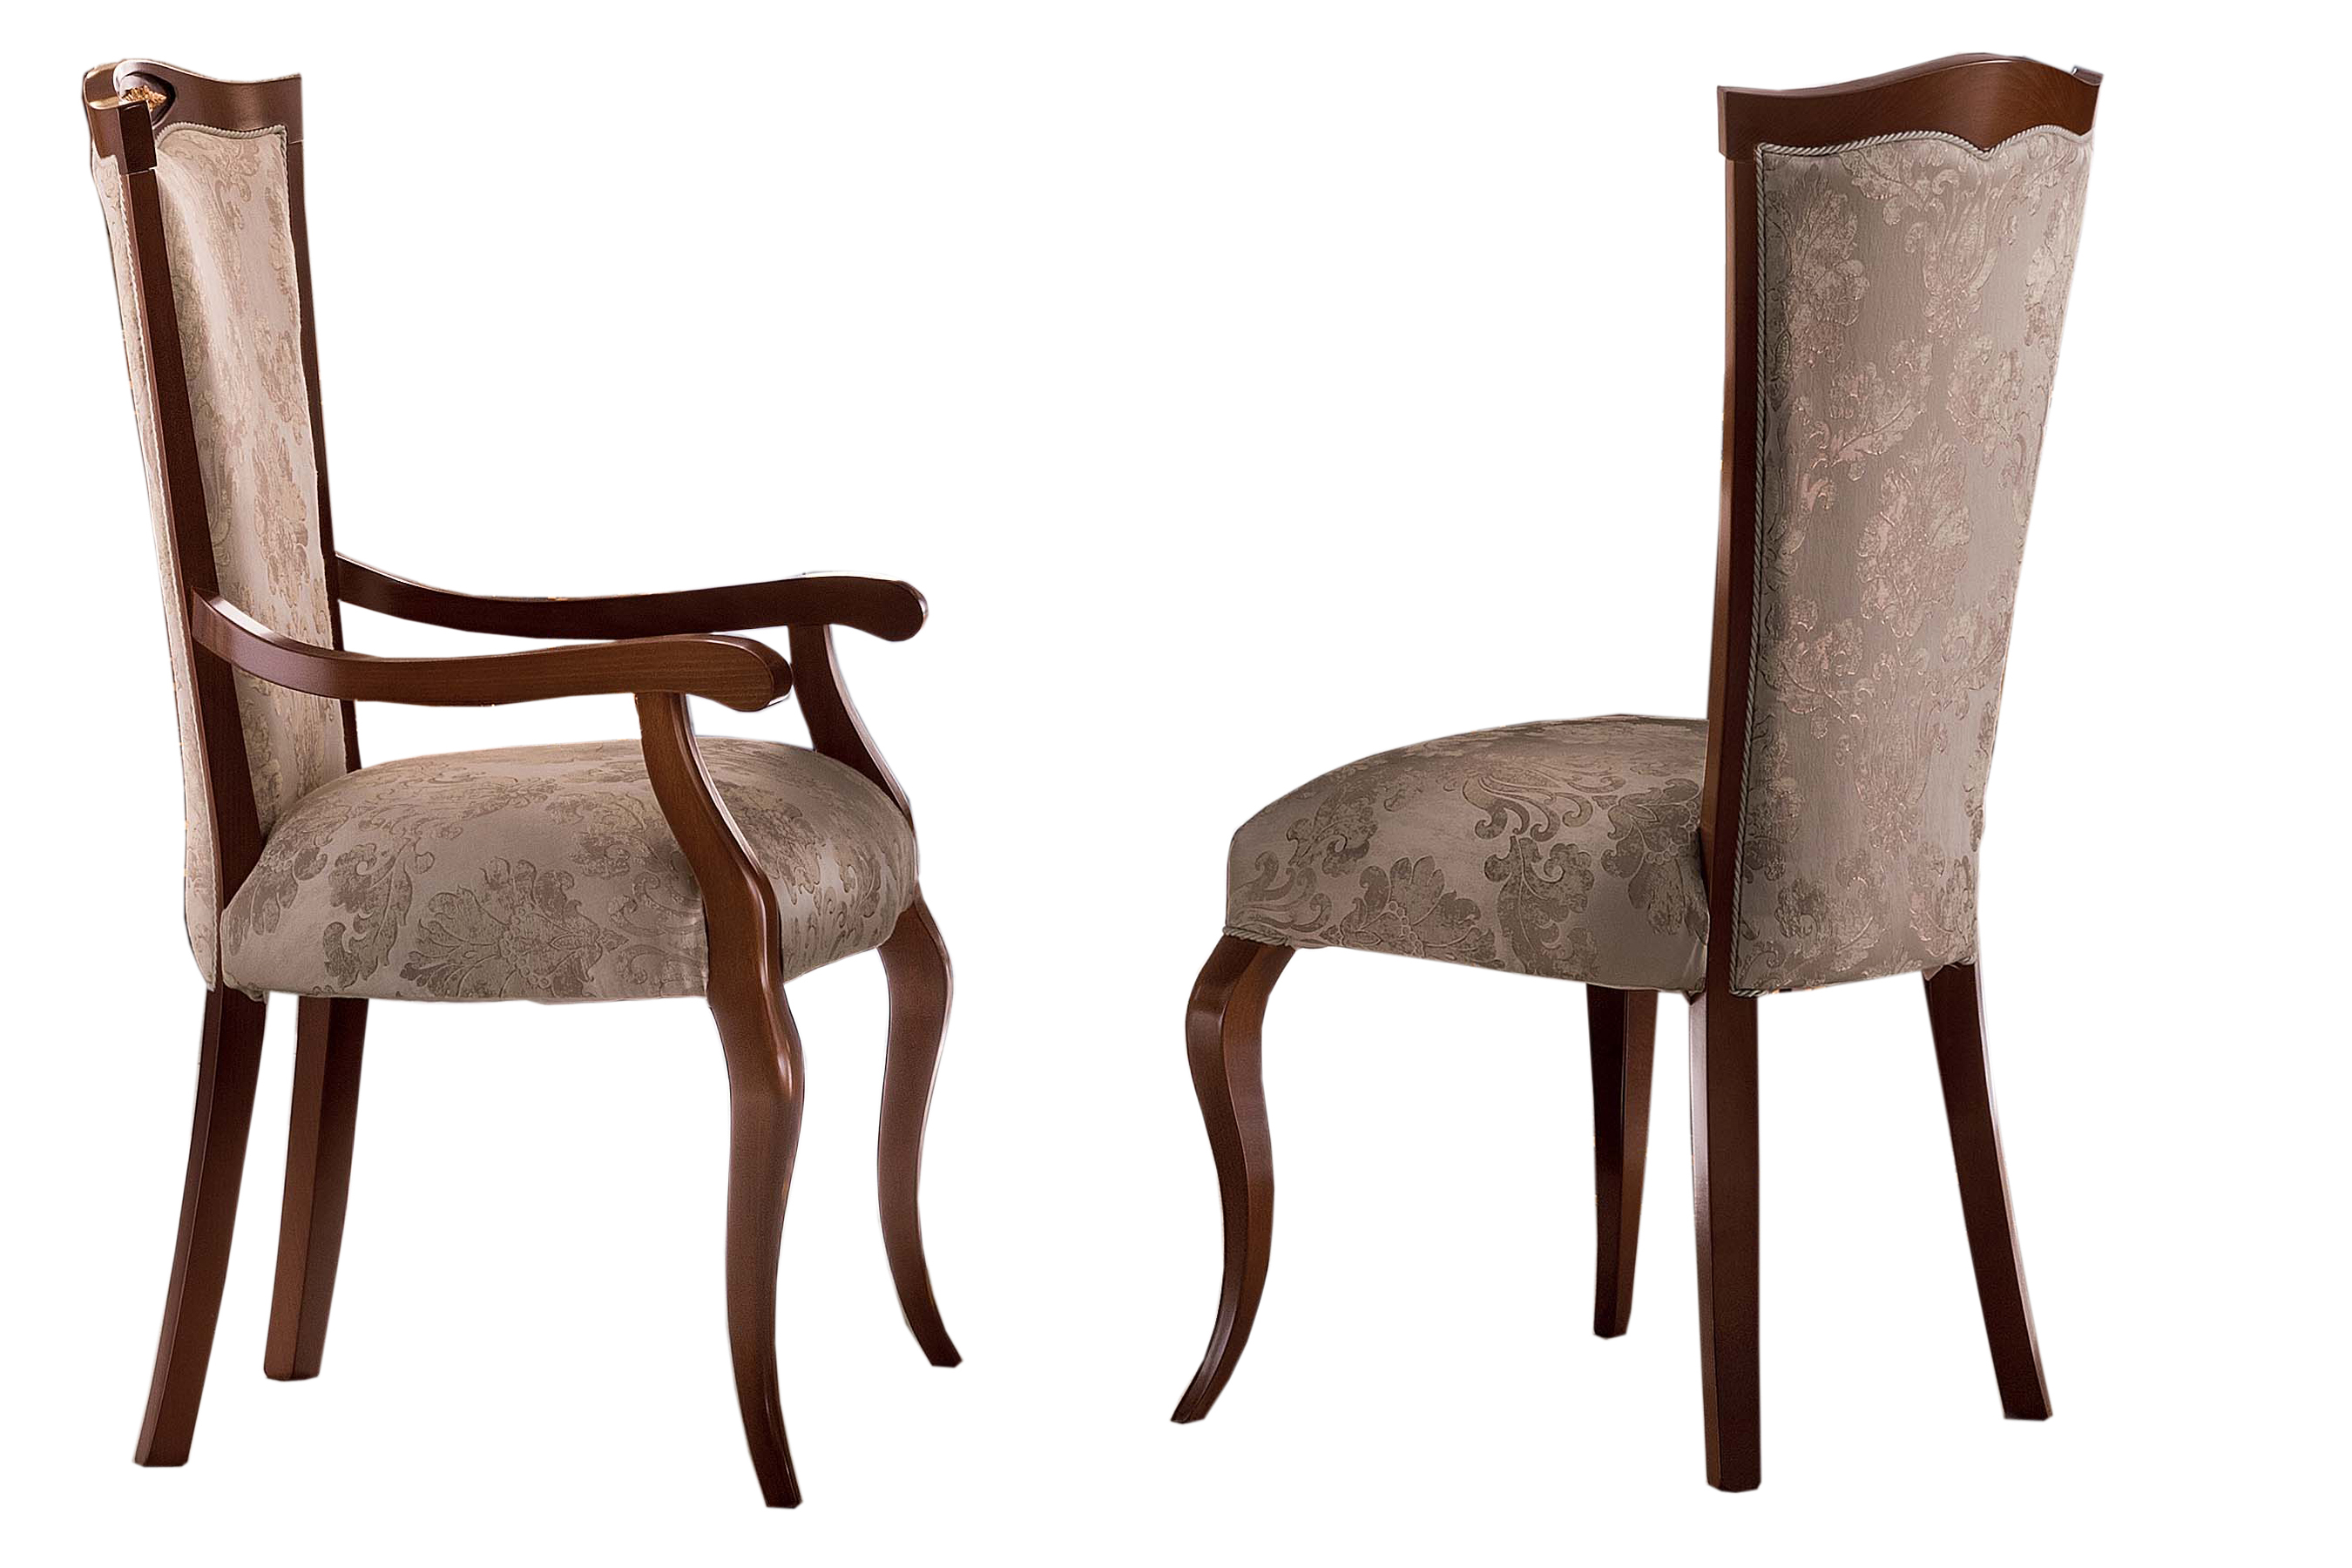 Brands Arredoclassic Dining Room, Italy Modigliani Chair by Arredoclassic